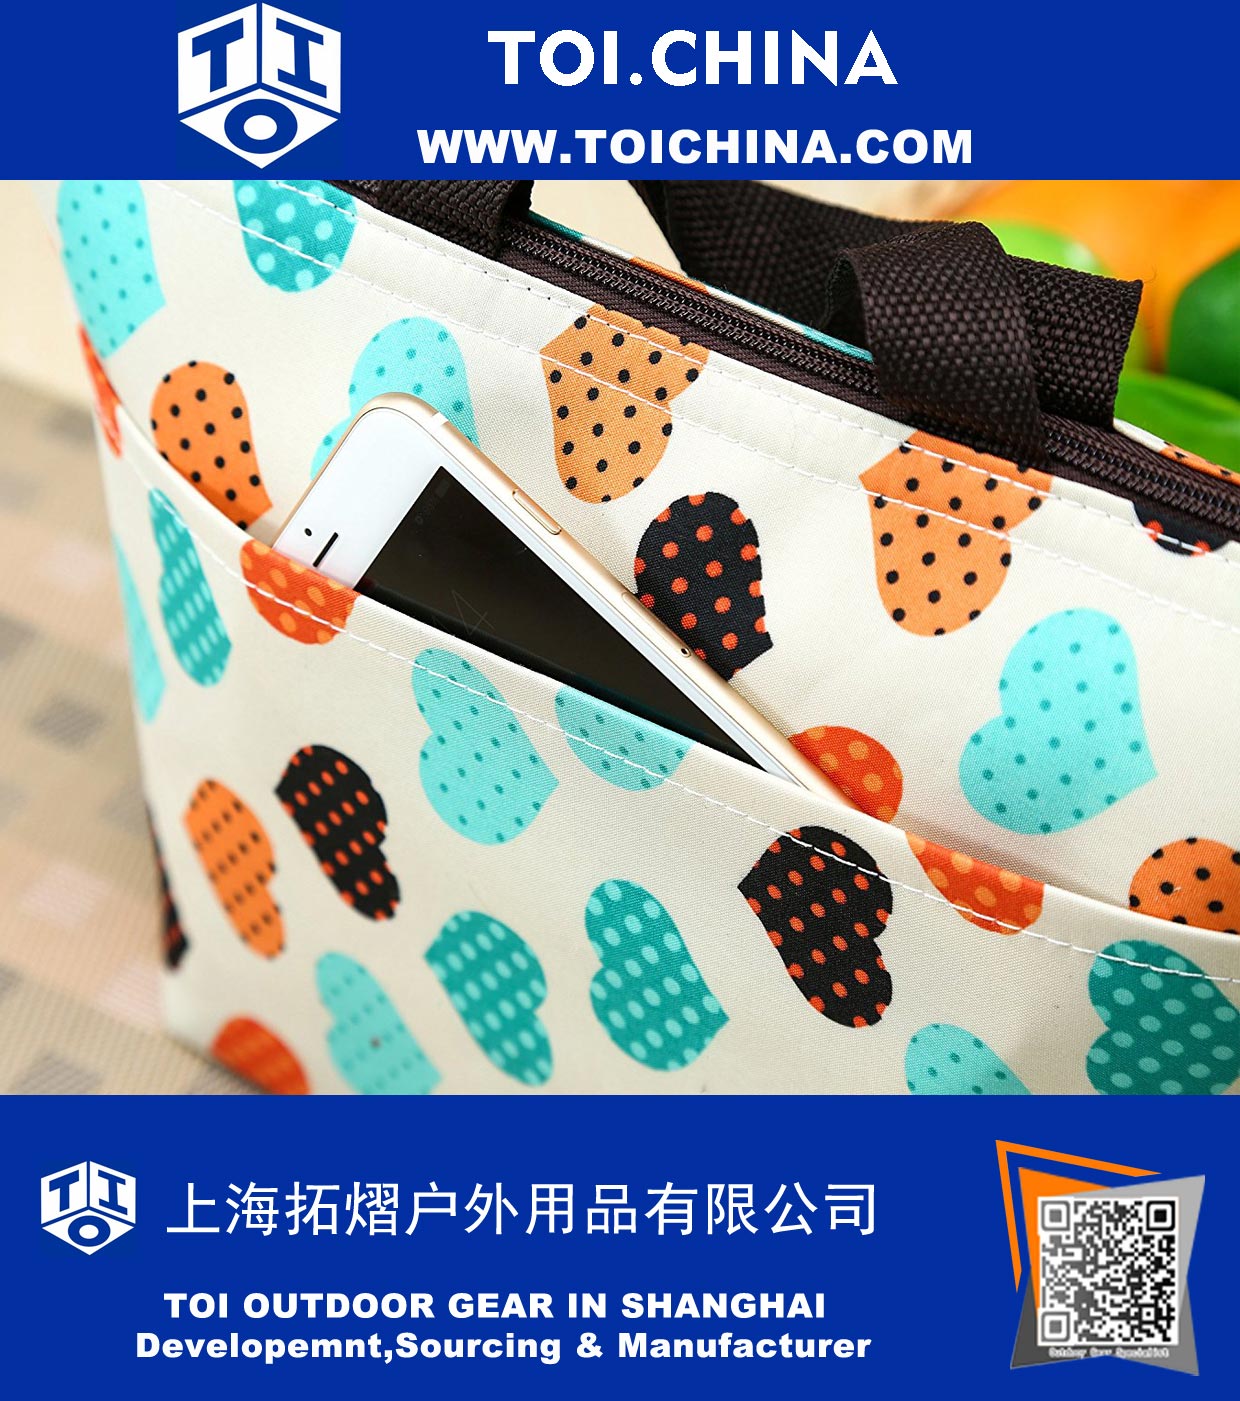 Printing Lunch Bags, LHome Oxford Cloth Aluminum Foil Insulated Zip Cooler Bag Portable Takeaway Aluminum Film Pack Cooler Bag Lunch Box Package